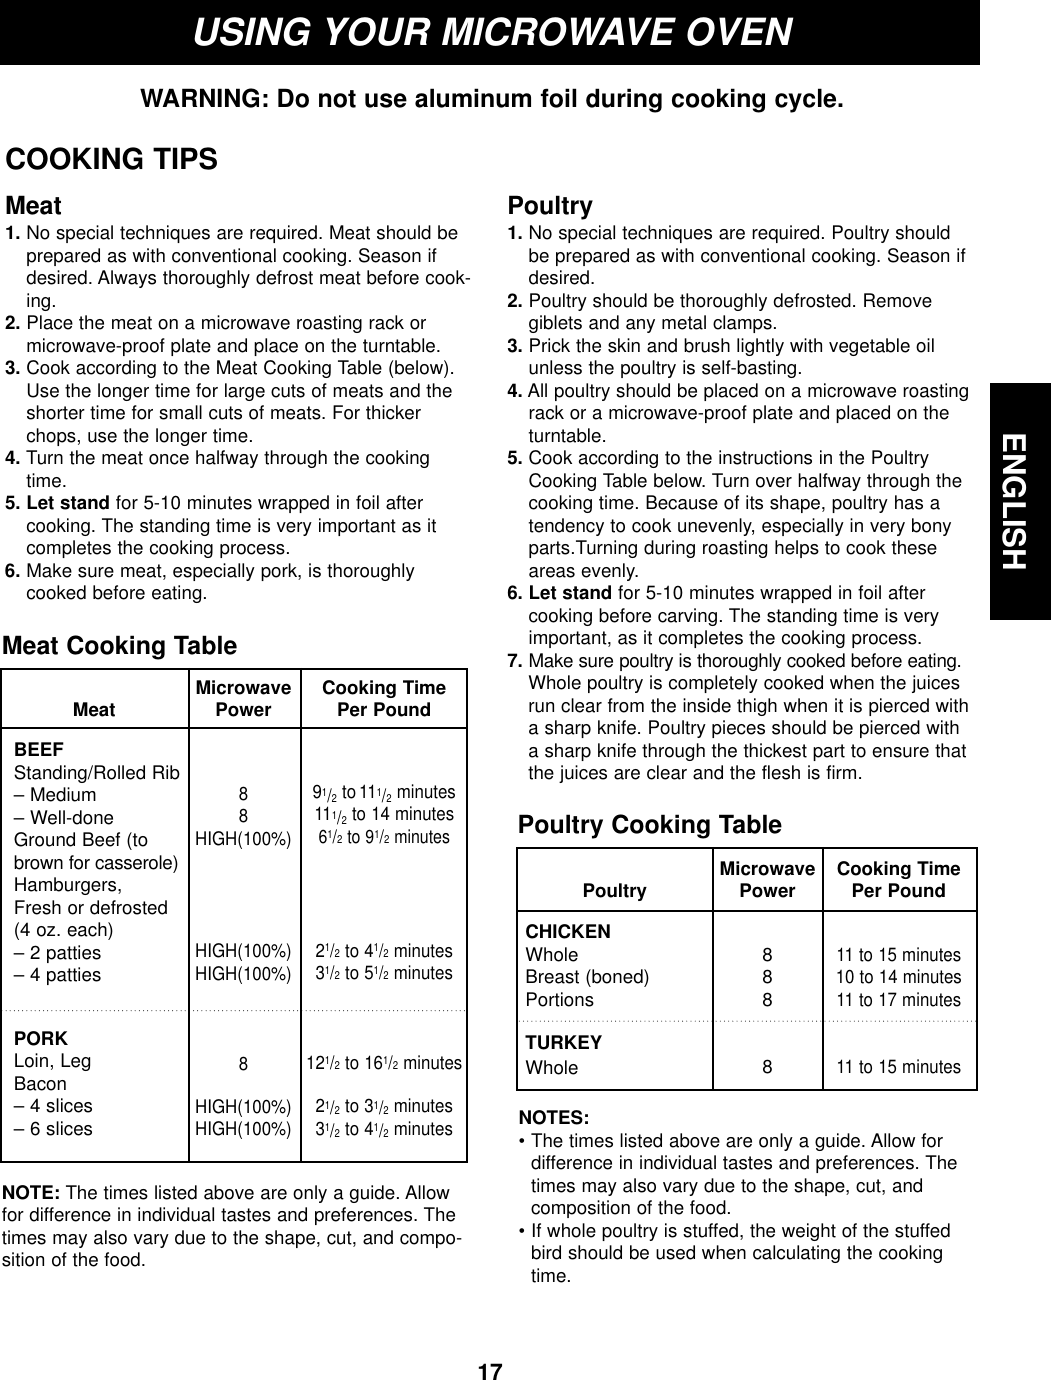 ENGLISH17ENGLISHMeat1. No special techniques are required. Meat should beprepared as with conventional cooking. Season ifdesired. Always thoroughly defrost meat before cook-ing.2. Place the meat on a microwave roasting rack ormicrowave-proof plate and place on the turntable.3. Cook according to the Meat Cooking Table (below).Use the longer time for large cuts of meats and theshorter time for small cuts of meats. For thickerchops, use the longer time.4. Turn the meat once halfway through the cookingtime.5. Let stand for 5-10 minutes wrapped in foil aftercooking. The standing time is very important as itcompletes the cooking process.6. Make sure meat, especially pork, is thoroughlycooked before eating.Poultry1. No special techniques are required. Poultry shouldbe prepared as with conventional cooking. Season ifdesired.2. Poultry should be thoroughly defrosted. Removegiblets and any metal clamps.3. Prick the skin and brush lightly with vegetable oilunless the poultry is self-basting.4. All poultry should be placed on a microwave roastingrack or a microwave-proof plate and placed on theturntable.5. Cook according to the instructions in the PoultryCooking Table below. Turn over halfway through thecooking time. Because of its shape, poultry has atendency to cook unevenly, especially in very bonyparts.Turning during roasting helps to cook theseareas evenly.6. Let stand for 5-10 minutes wrapped in foil aftercooking before carving. The standing time is veryimportant, as it completes the cooking process.7. Make sure poultry is thoroughly cooked before eating.Whole poultry is completely cooked when the juicesrun clear from the inside thigh when it is pierced witha sharp knife. Poultry pieces should be pierced witha sharp knife through the thickest part to ensure thatthe juices are clear and the flesh is firm.USING YOUR MICROWAVE OVENWARNING: Do not use aluminum foil during cooking cycle.BEEFStanding/Rolled Rib– Medium– Well-doneGround Beef (tobrown for casserole)Hamburgers,Fresh or defrosted(4 oz. each)– 2 patties– 4 pattiesPORKLoin, LegBacon– 4 slices– 6 slicesMicrowavePower88HIGH(100%)HIGH(100%)HIGH(100%)8HIGH(100%)HIGH(100%)Cooking TimePer Pound91/2to 111/2minutes111/2to 14 minutes 61/2to 91/2minutes21/2to 41/2minutes31/2to 51/2minutes121/2to 161/2minutes21/2to 31/2minutes31/2to 41/2minutesMeat Cooking TableCHICKENWholeBreast (boned)PortionsTURKEYWholeMicrowavePower8888Cooking TimePer Pound11 to 15 minutes10 to 14 minutes11 to 17 minutes11 to 15 minutesPoultry Cooking TableNOTES:• The times listed above are only a guide. Allow for difference in individual tastes and preferences. Thetimes may also vary due to the shape, cut, and composition of the food.• If whole poultry is stuffed, the weight of the stuffedbird should be used when calculating the cookingtime.NOTE: The times listed above are only a guide. Allowfor difference in individual tastes and preferences. Thetimes may also vary due to the shape, cut, and compo-sition of the food.PoultryCOOKING TIPSMeat